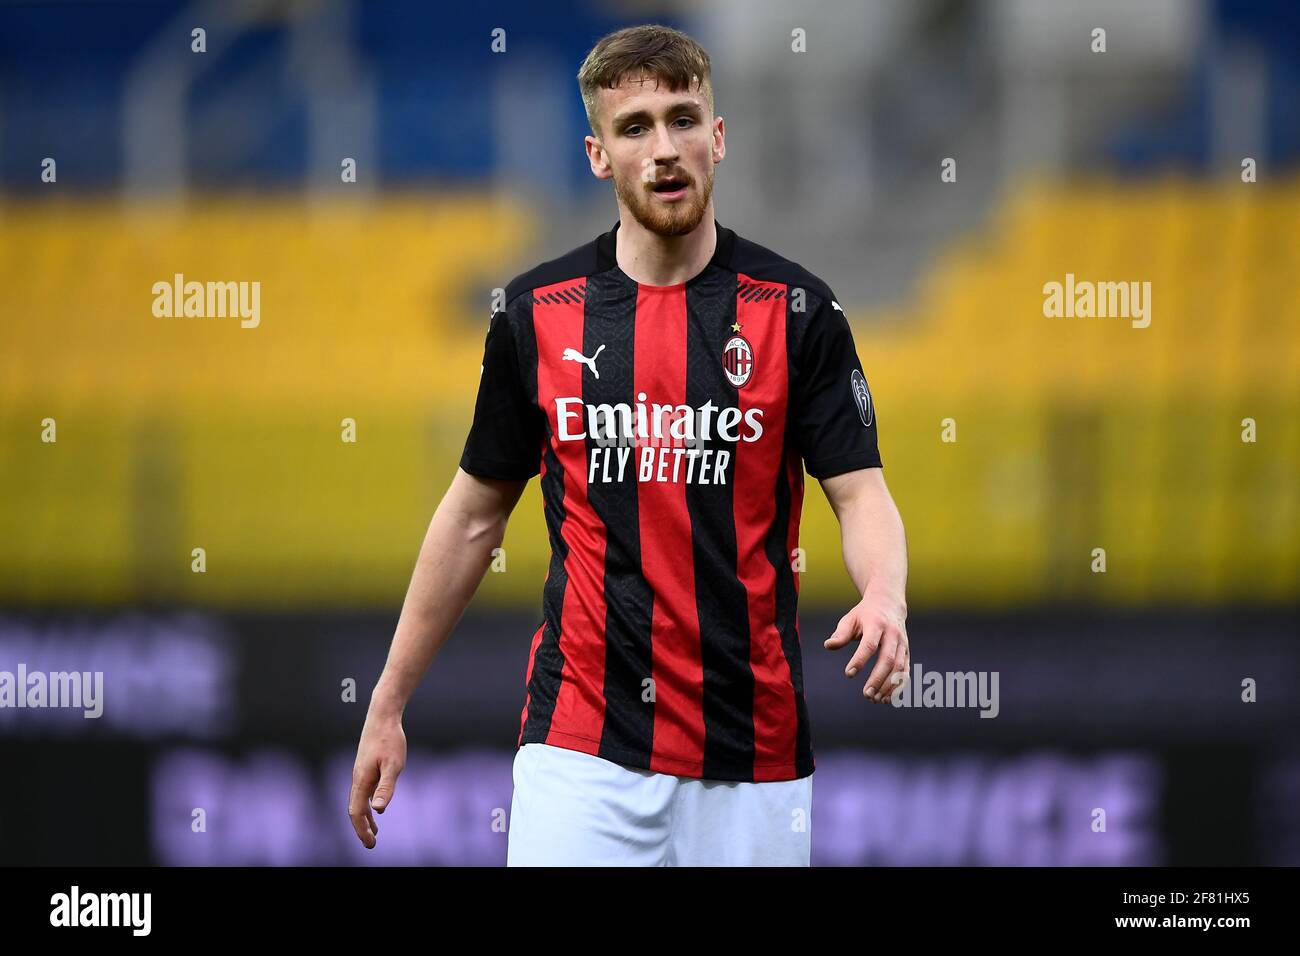 Parma, Italy - 10 April, 2021: Alexis Saelemaekers of AC Milan looks on  during the Serie A football match between Parma Calcio and AC Milan. AC  Milan won 3-1 over Parma Calcio.